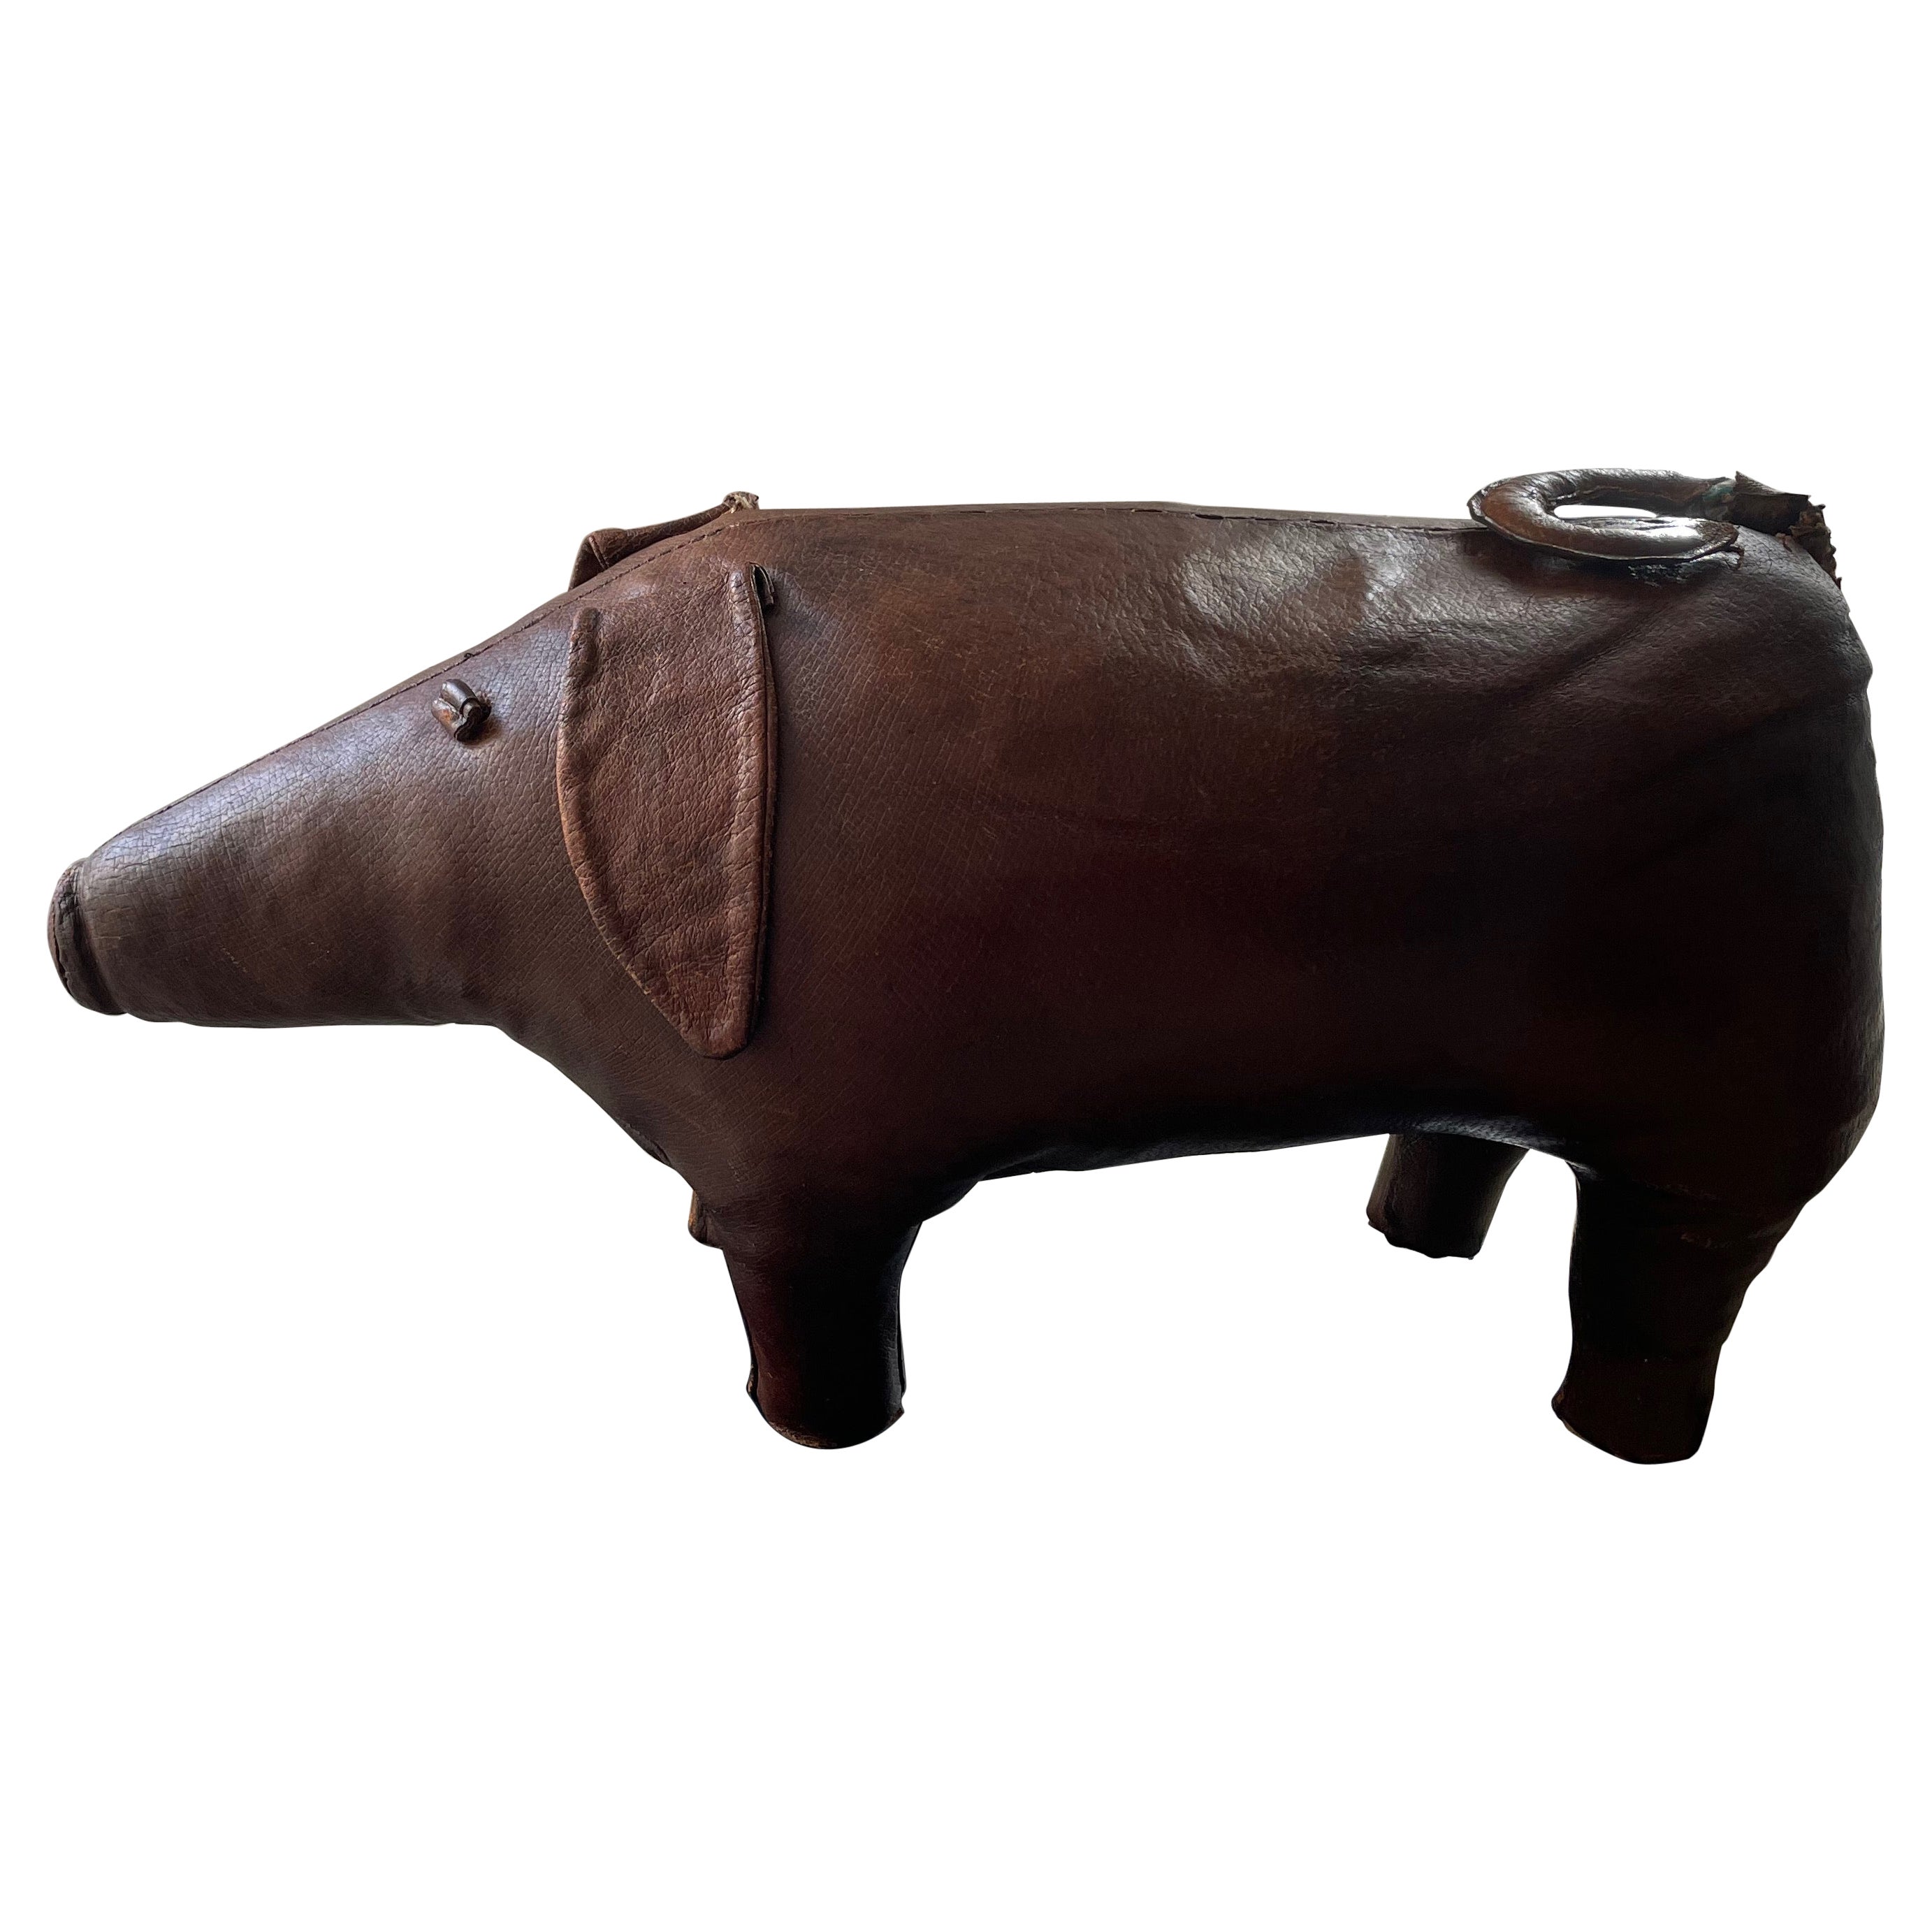  Liberty 's Ottoman Leather Pig by Dimitri Omersa For Sale